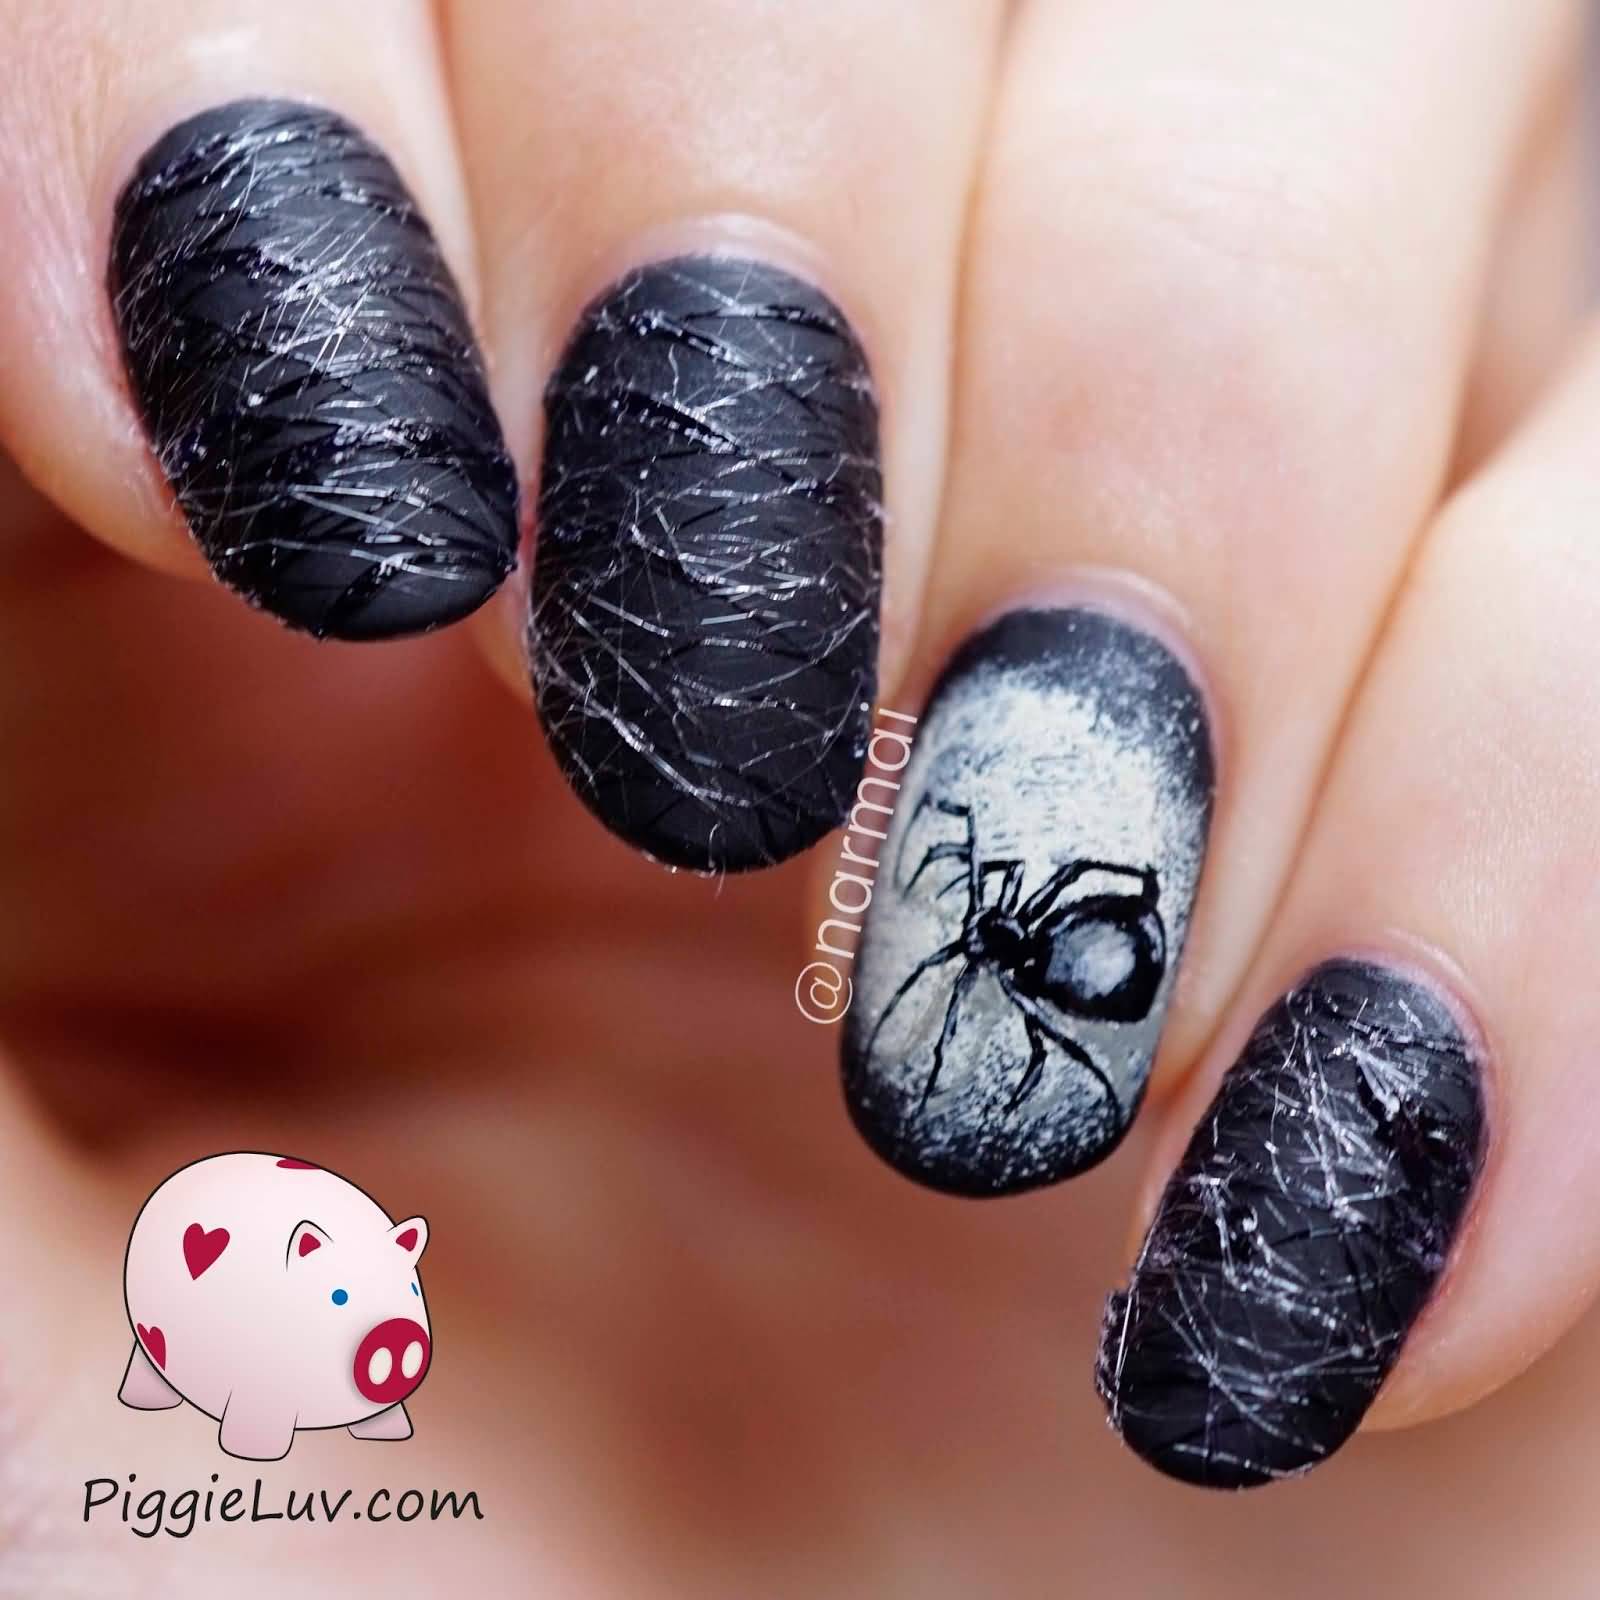 Unique 3d Spider And Web Halloween Nail Art